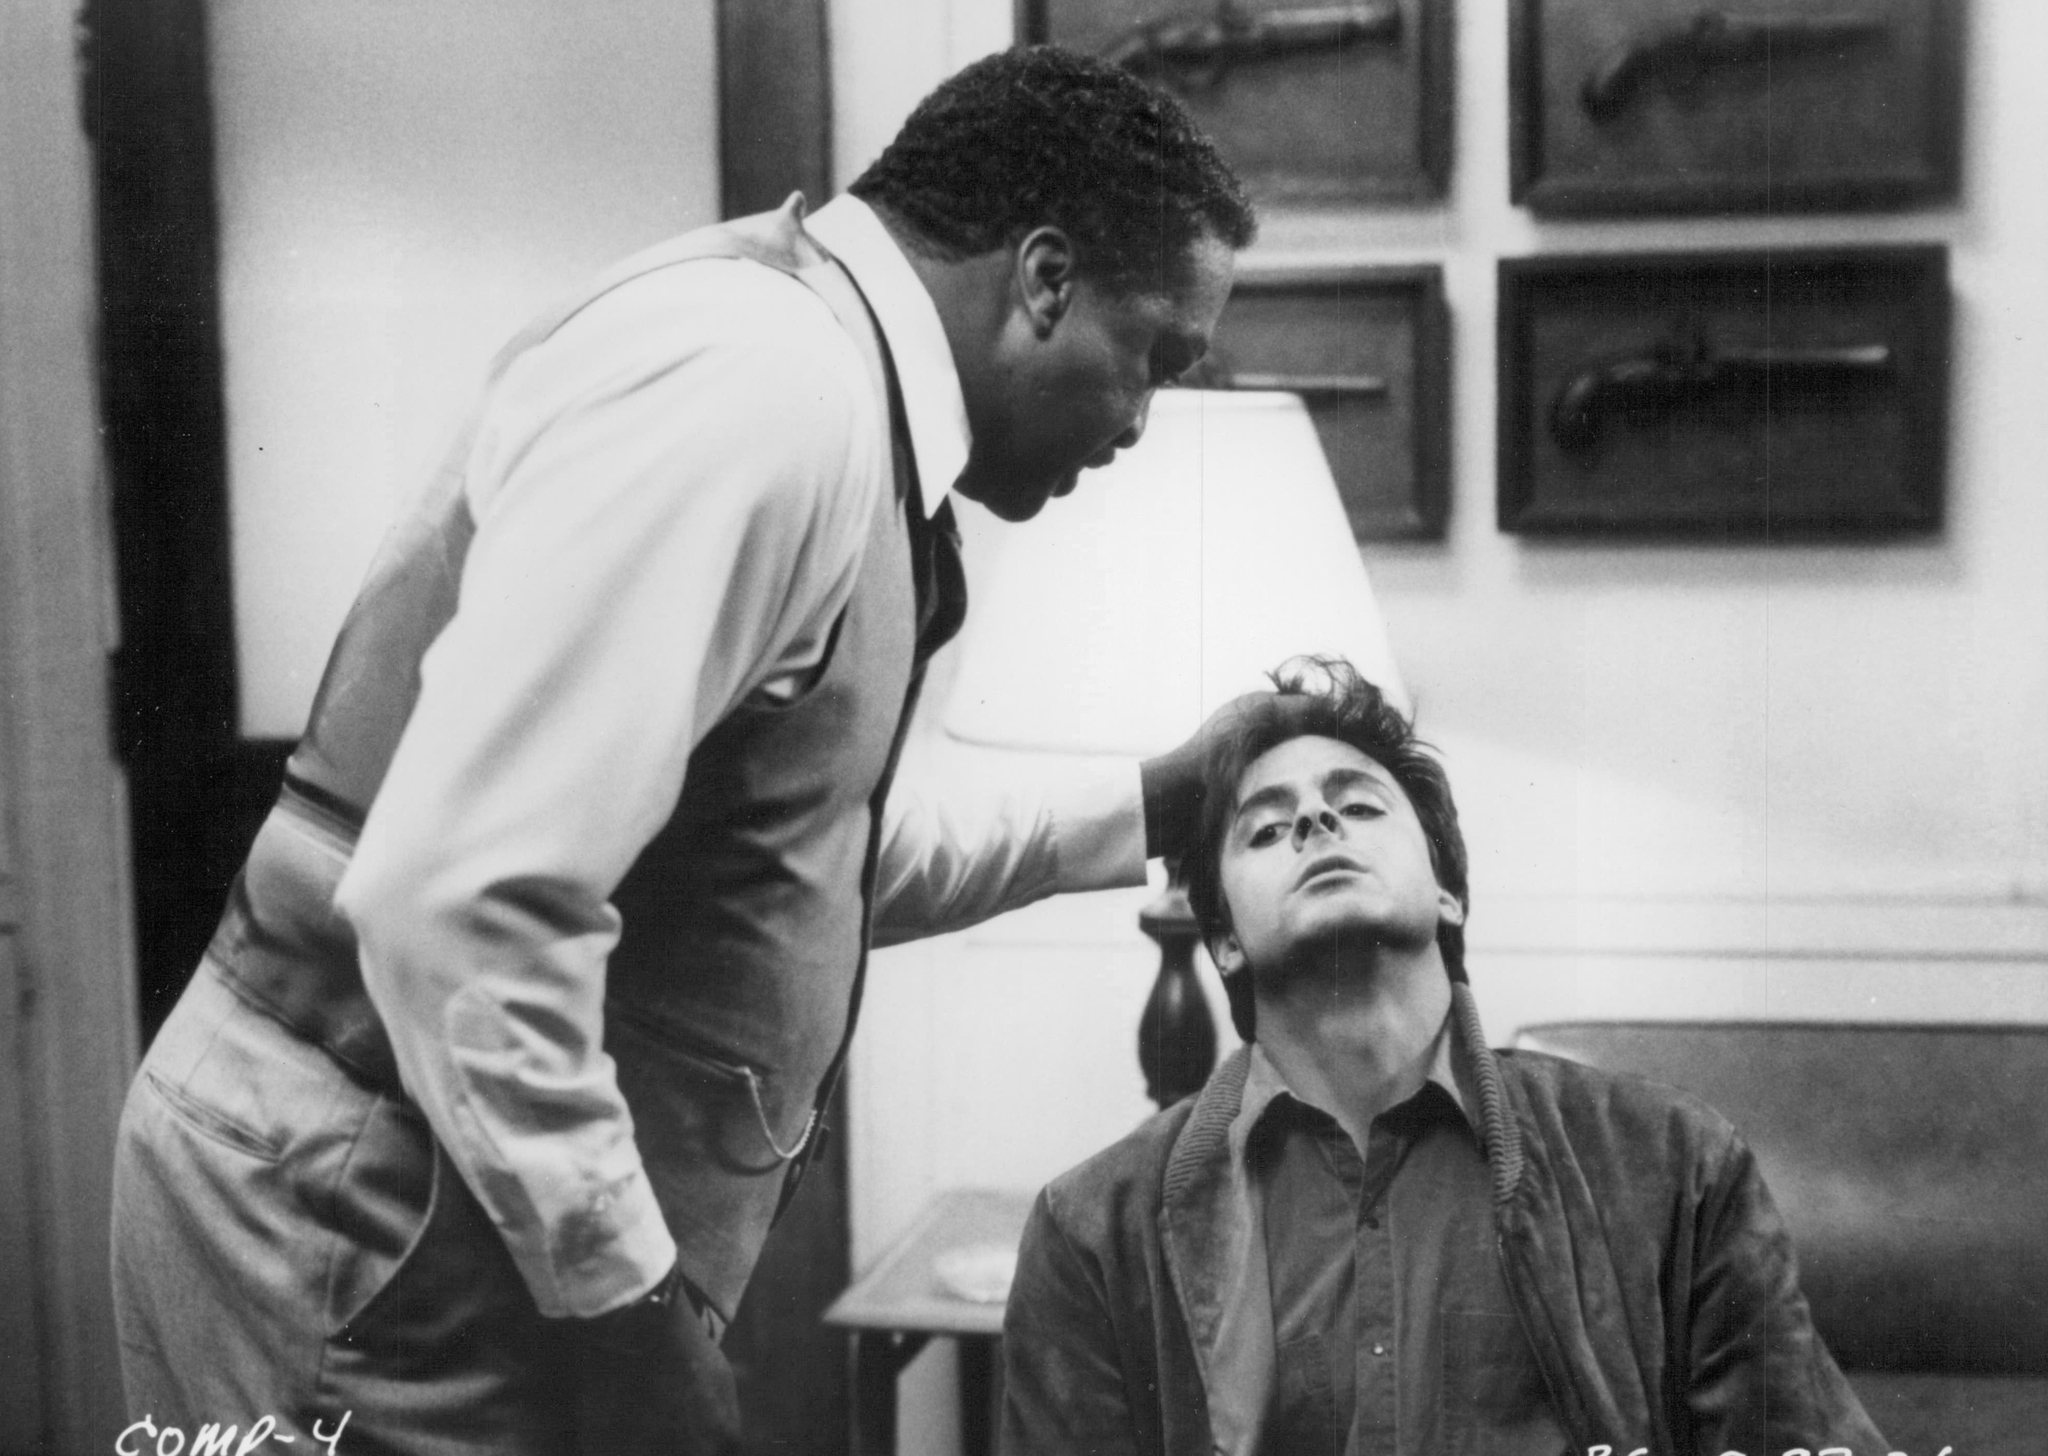 Still of Judd Nelson and Paul Winfield in Blue City (1986)